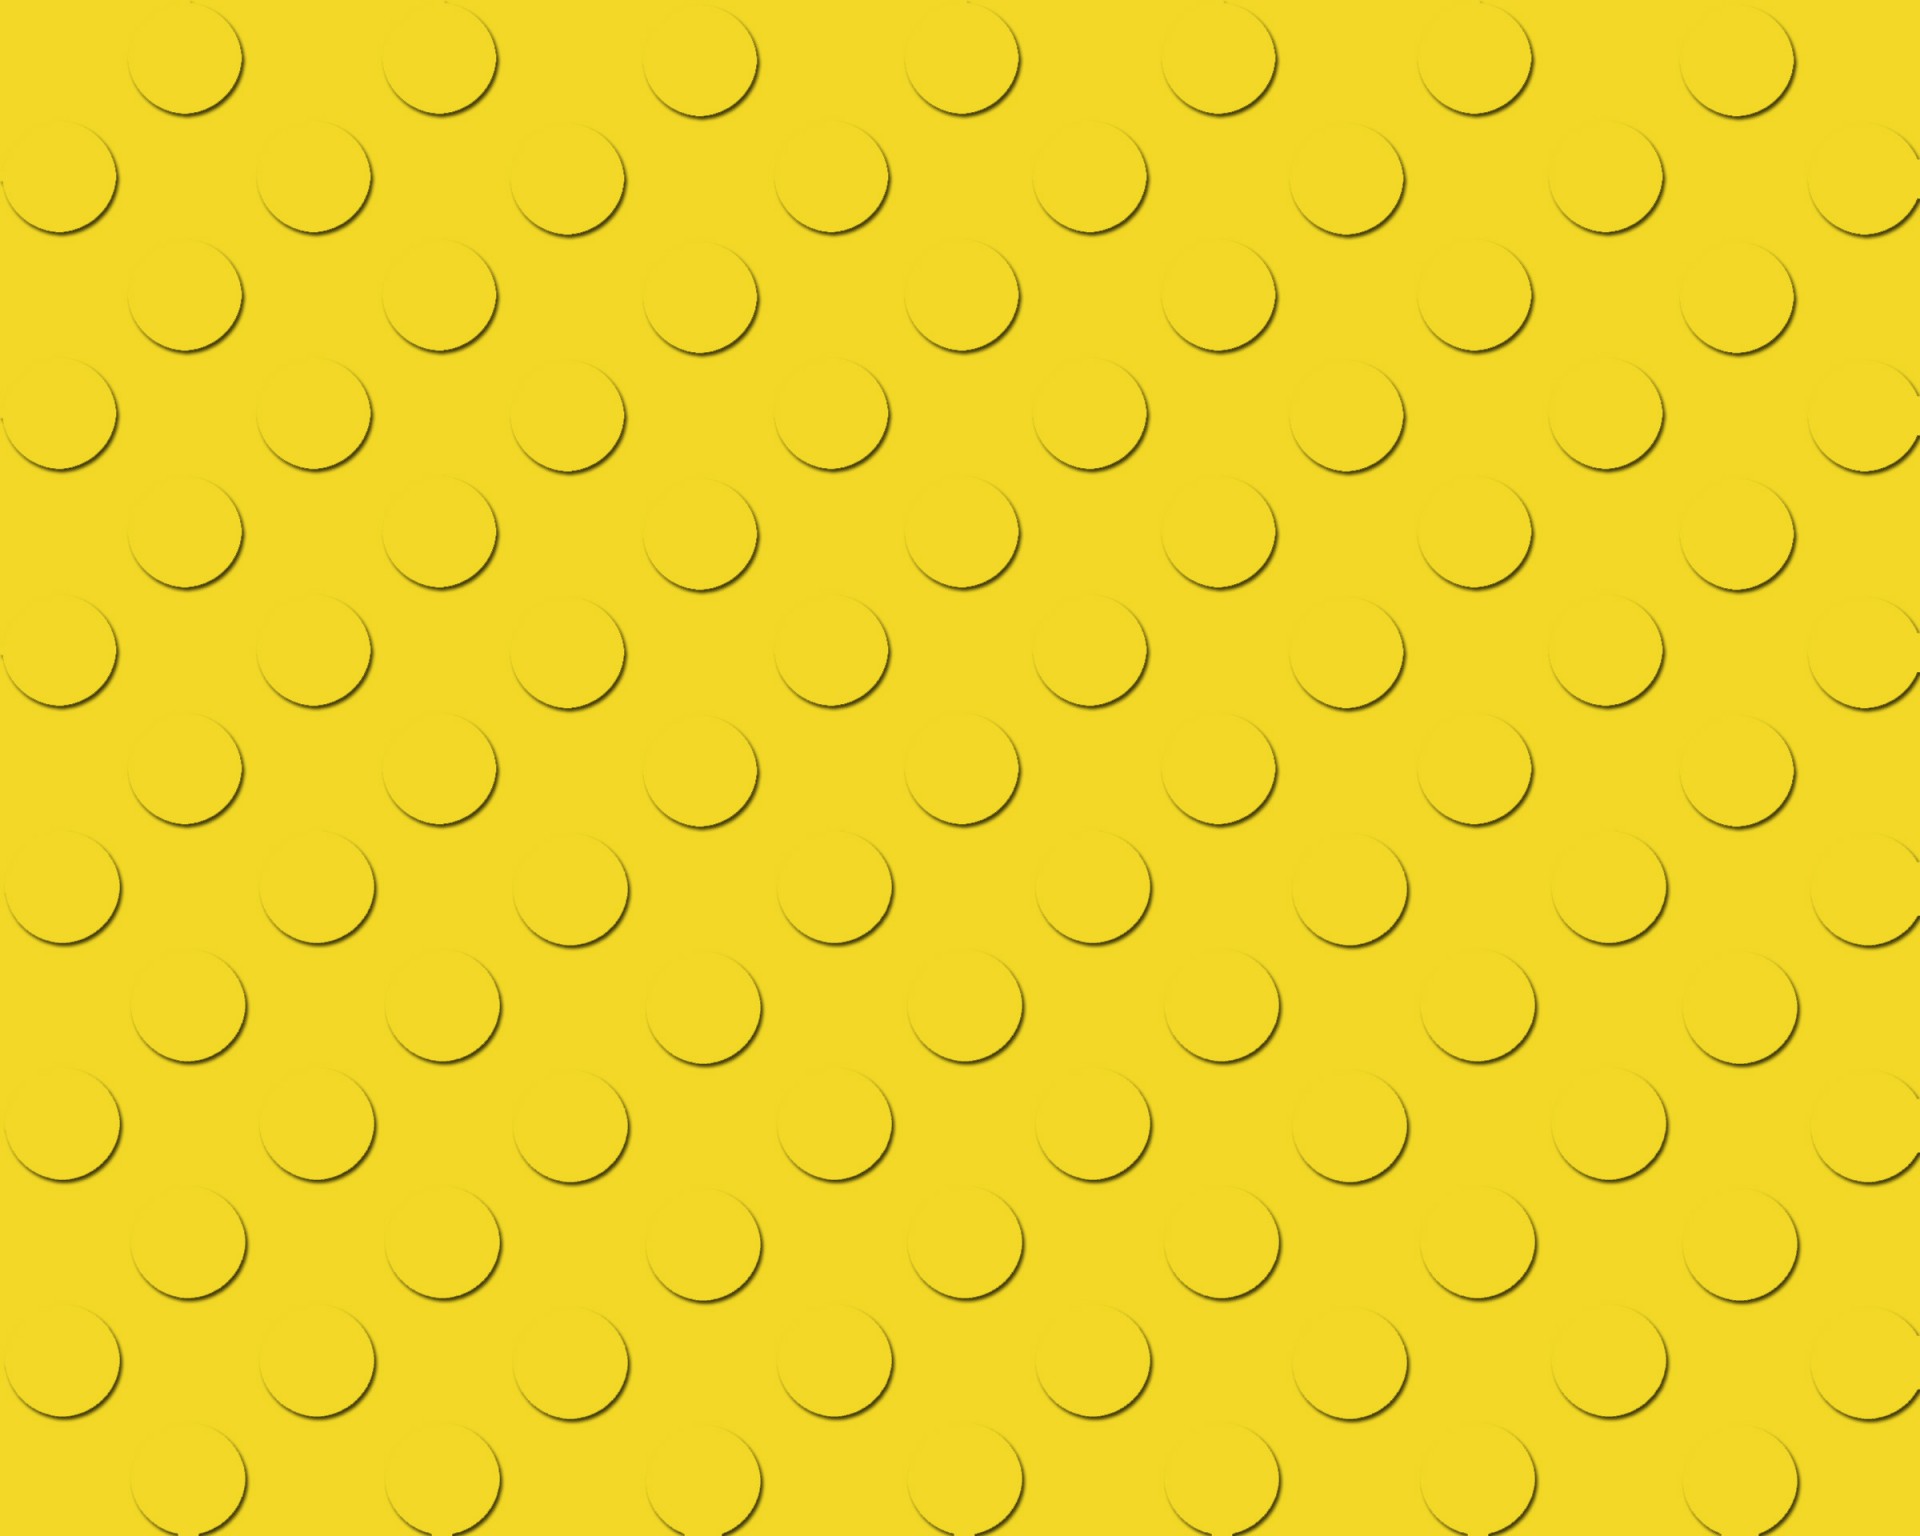 Yellow,lego,blocks,toys,texture - free image from